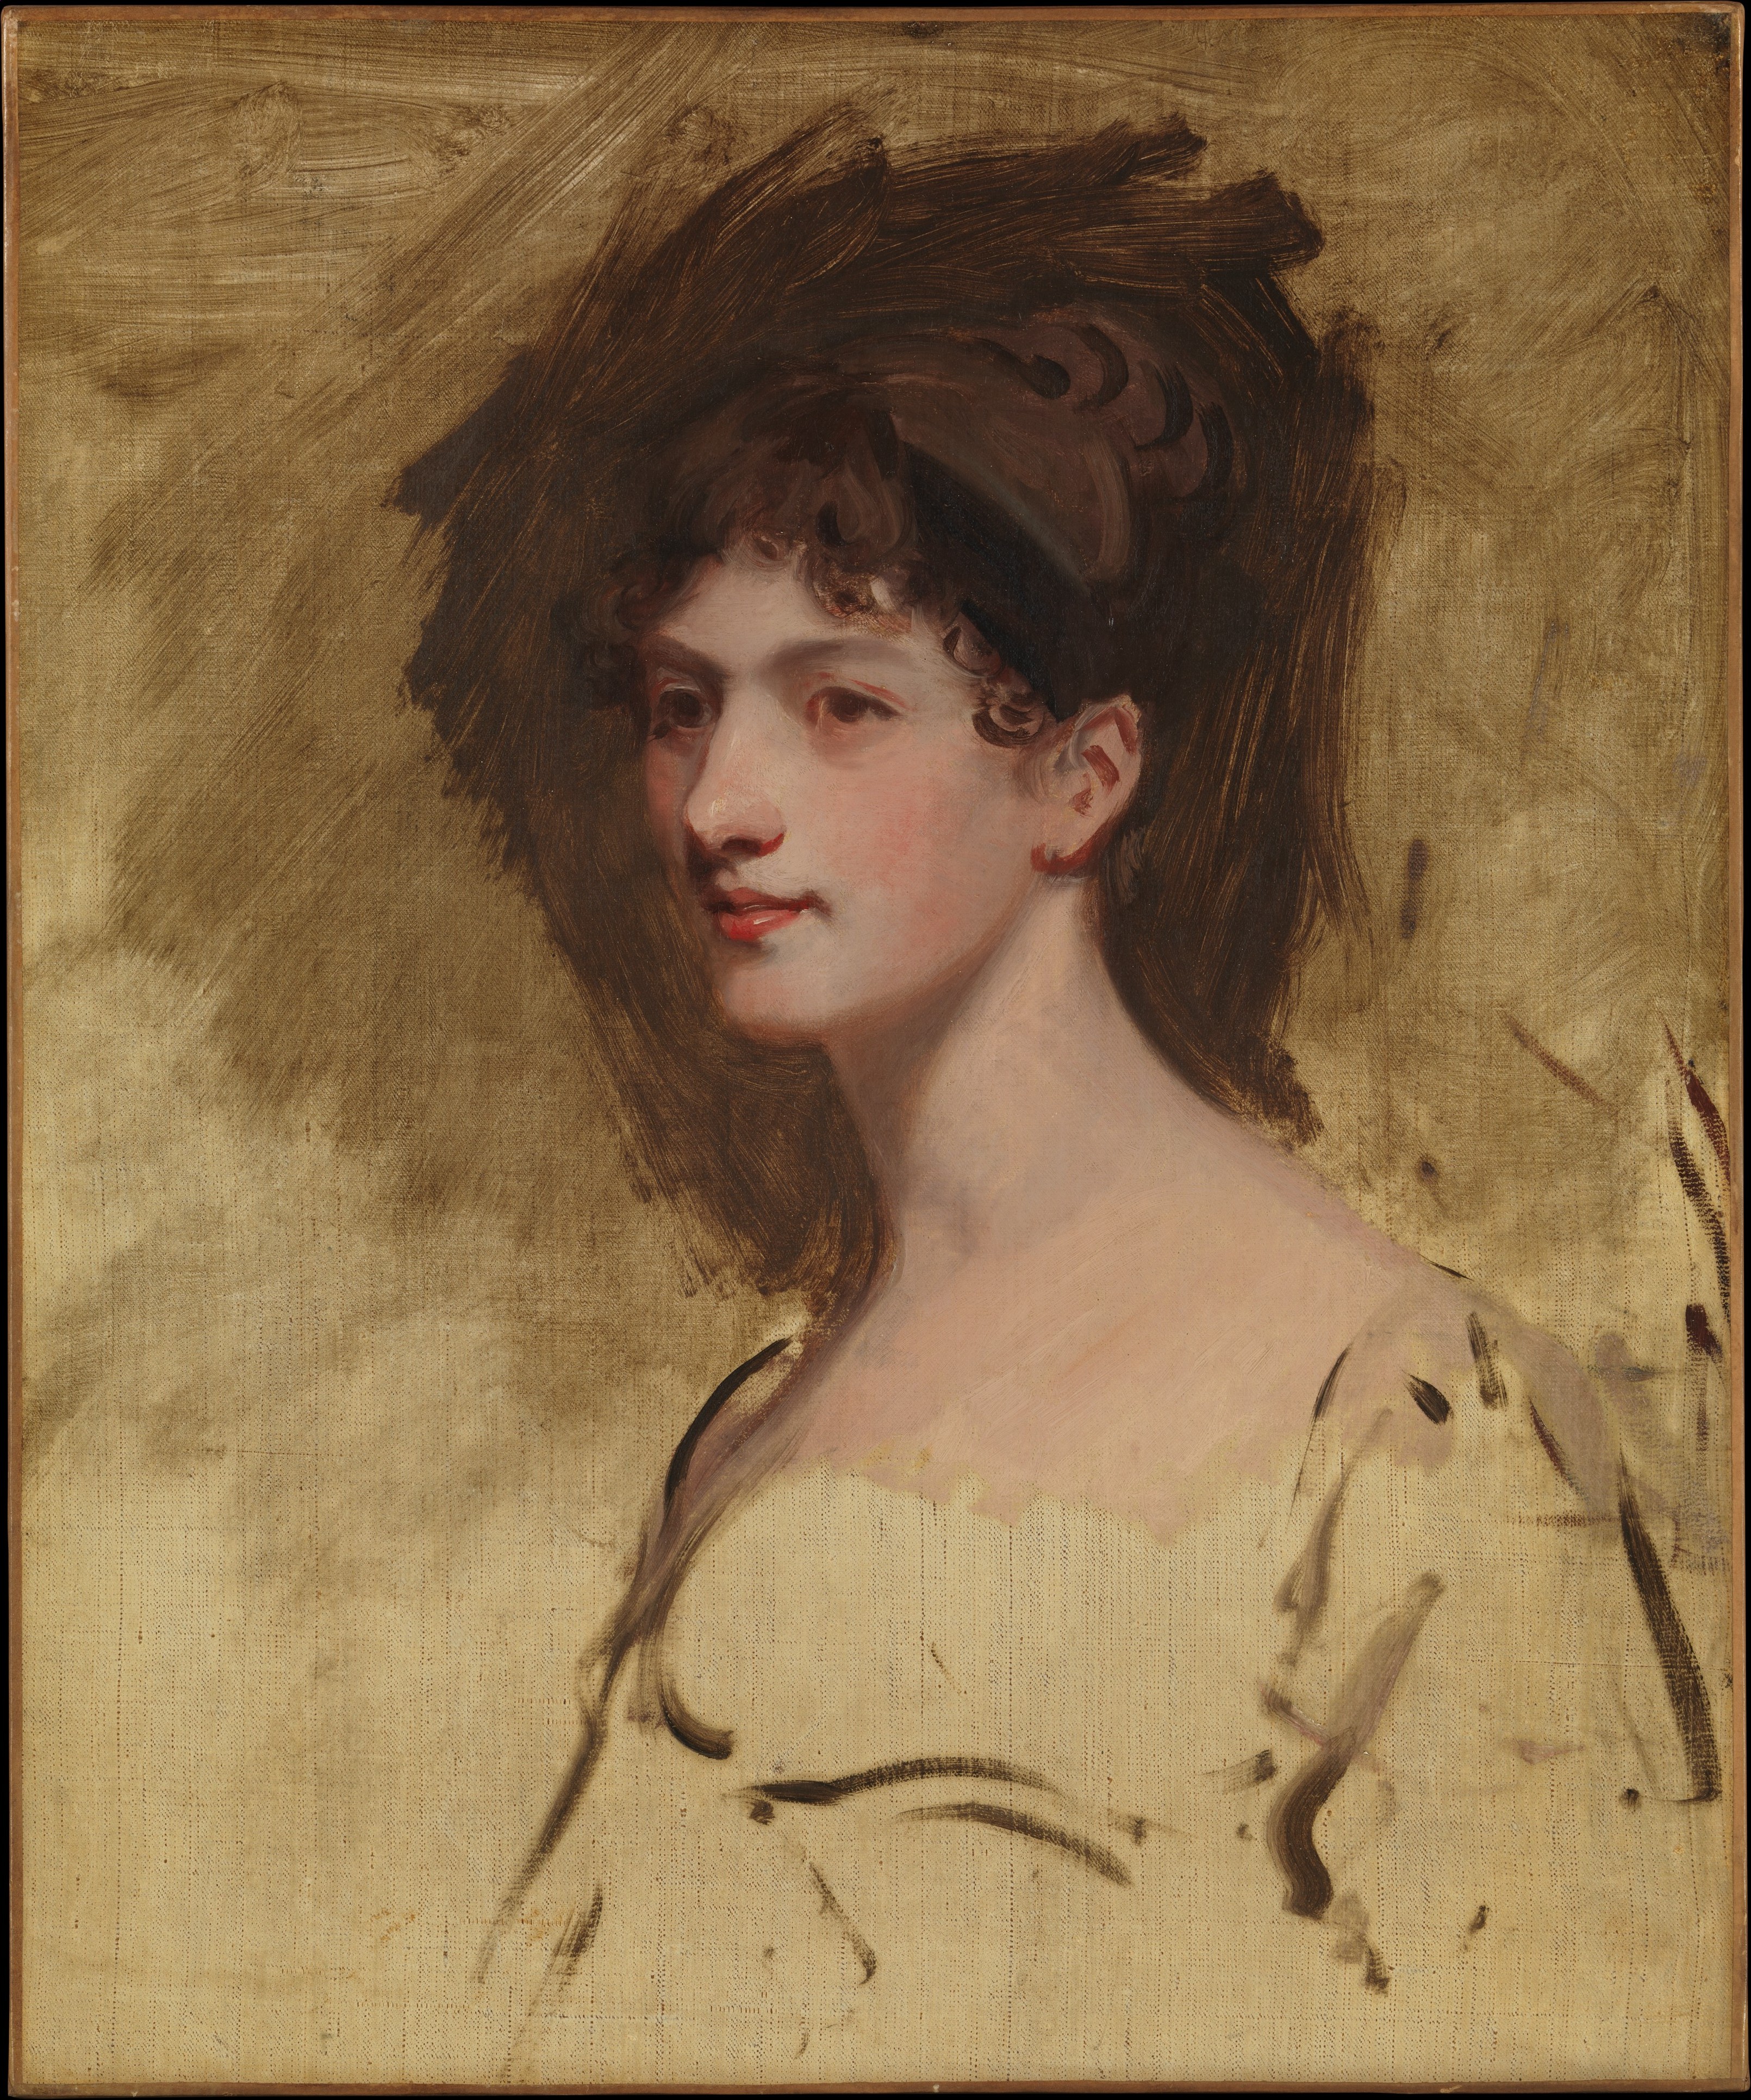 Sketch including partial painted area, young woman in profile